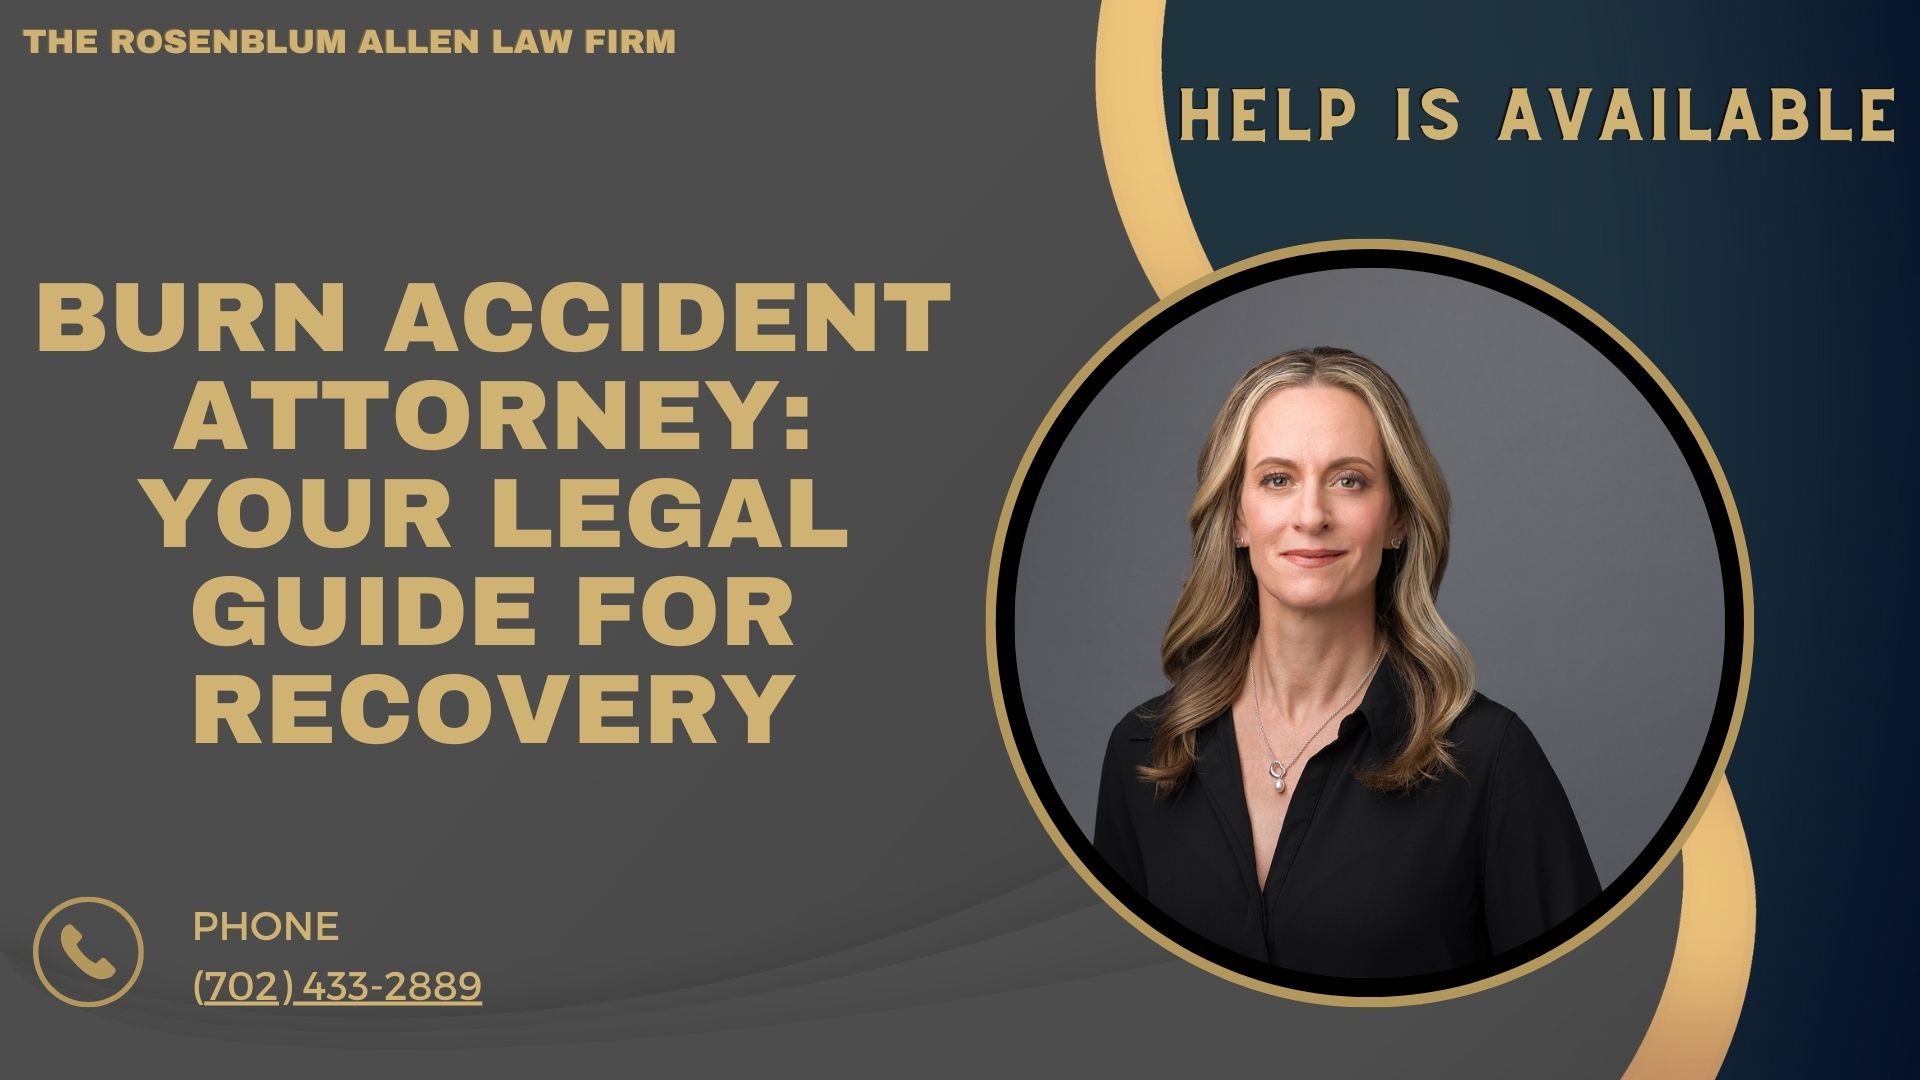 Burn accident attorney: your legal guide for recovery banner